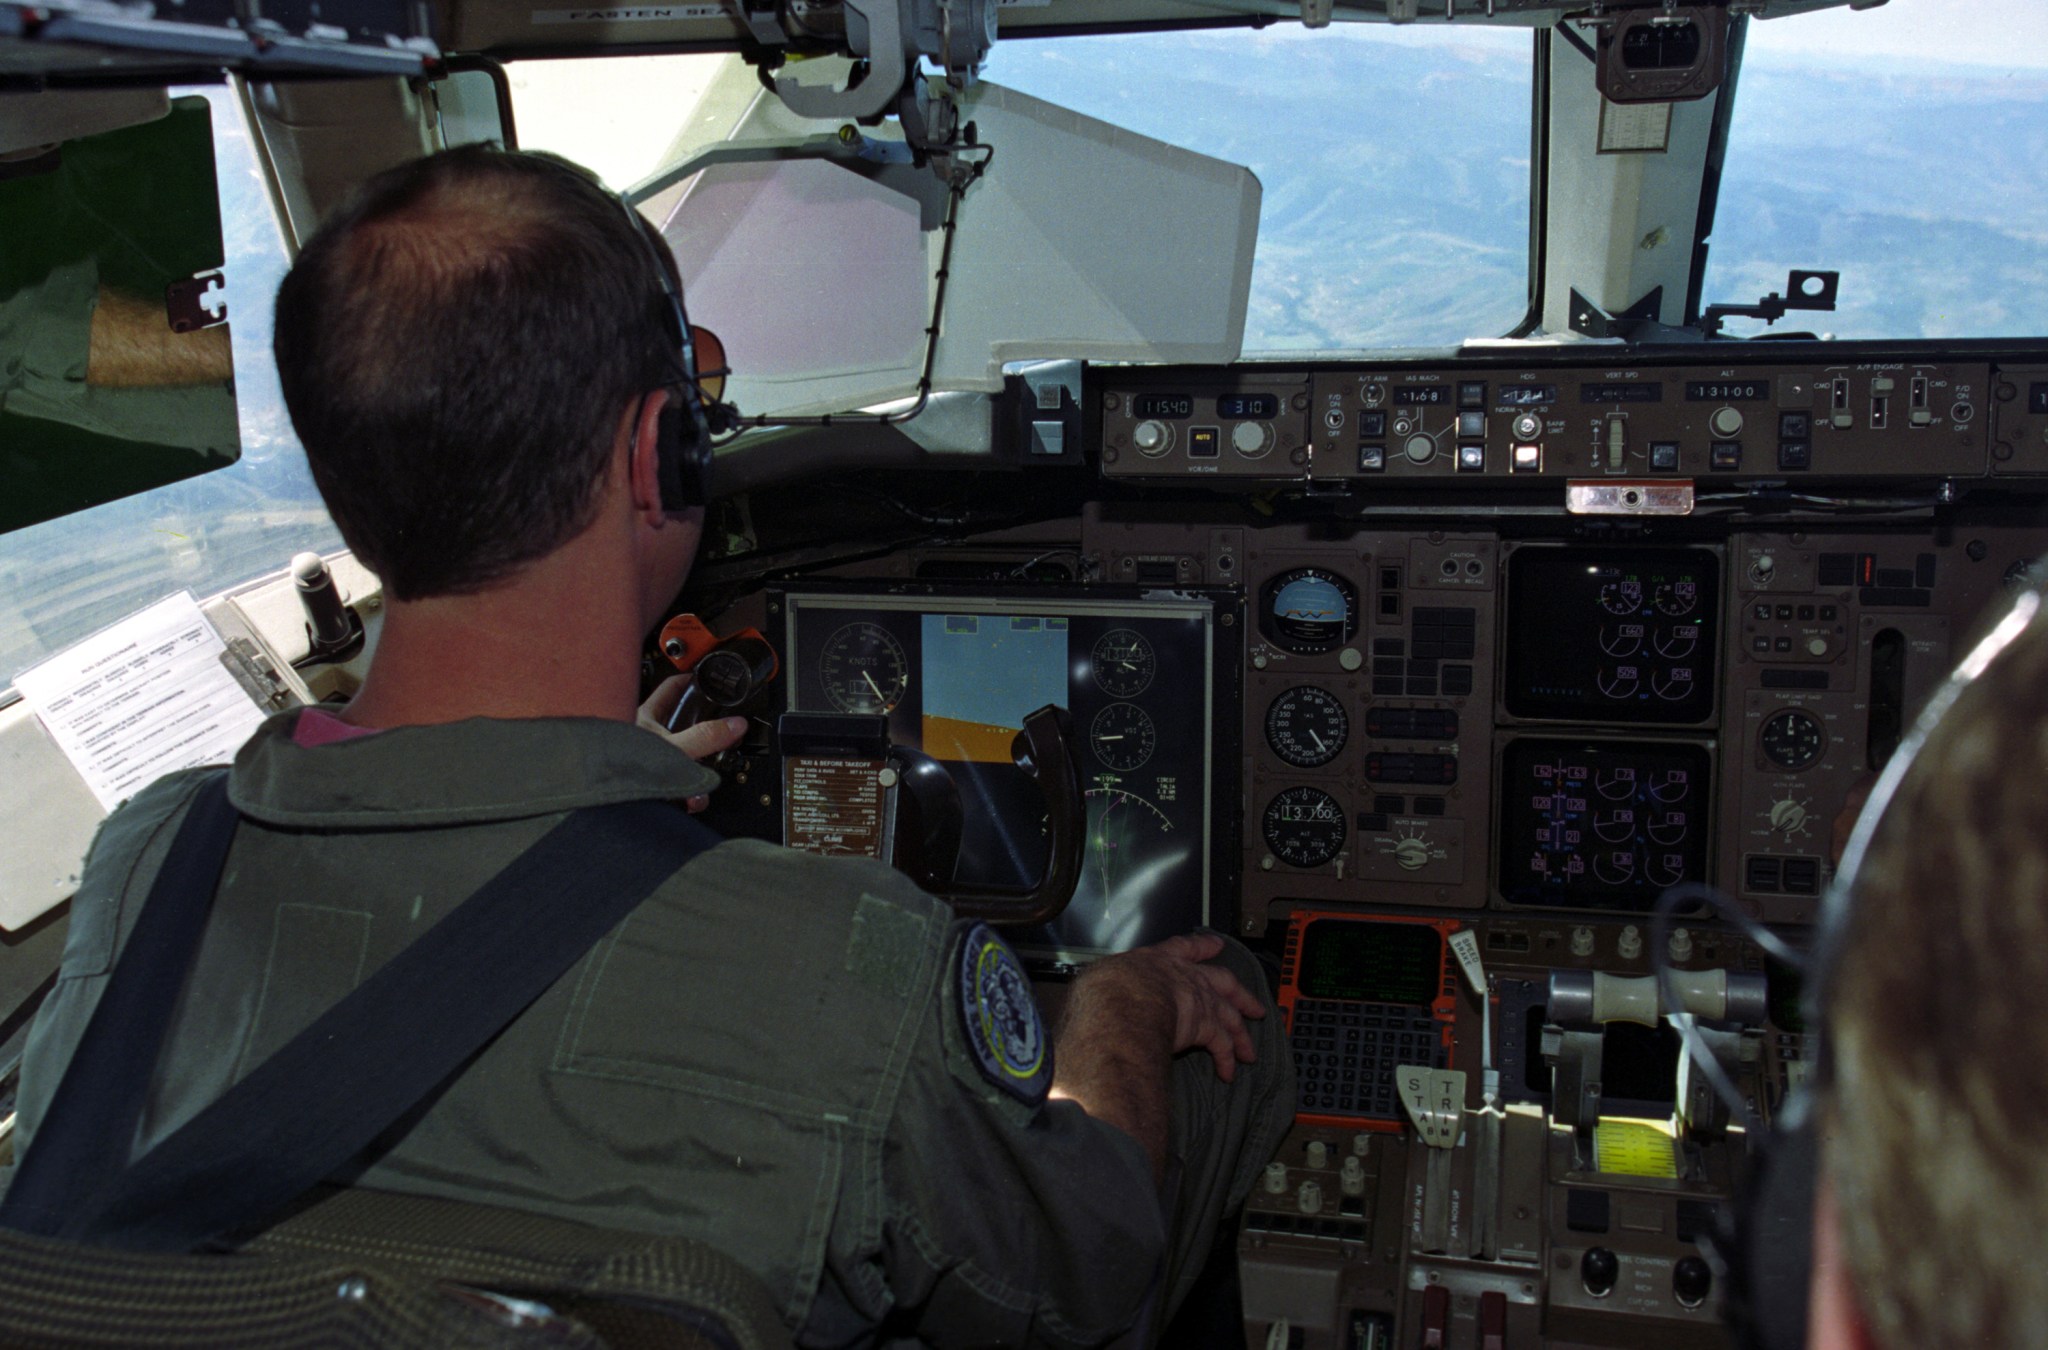 Pilot Dan Kiggins was one of a number of pilots who tested Synthetic Vision display technology on a NASA aircraft in Colorado.